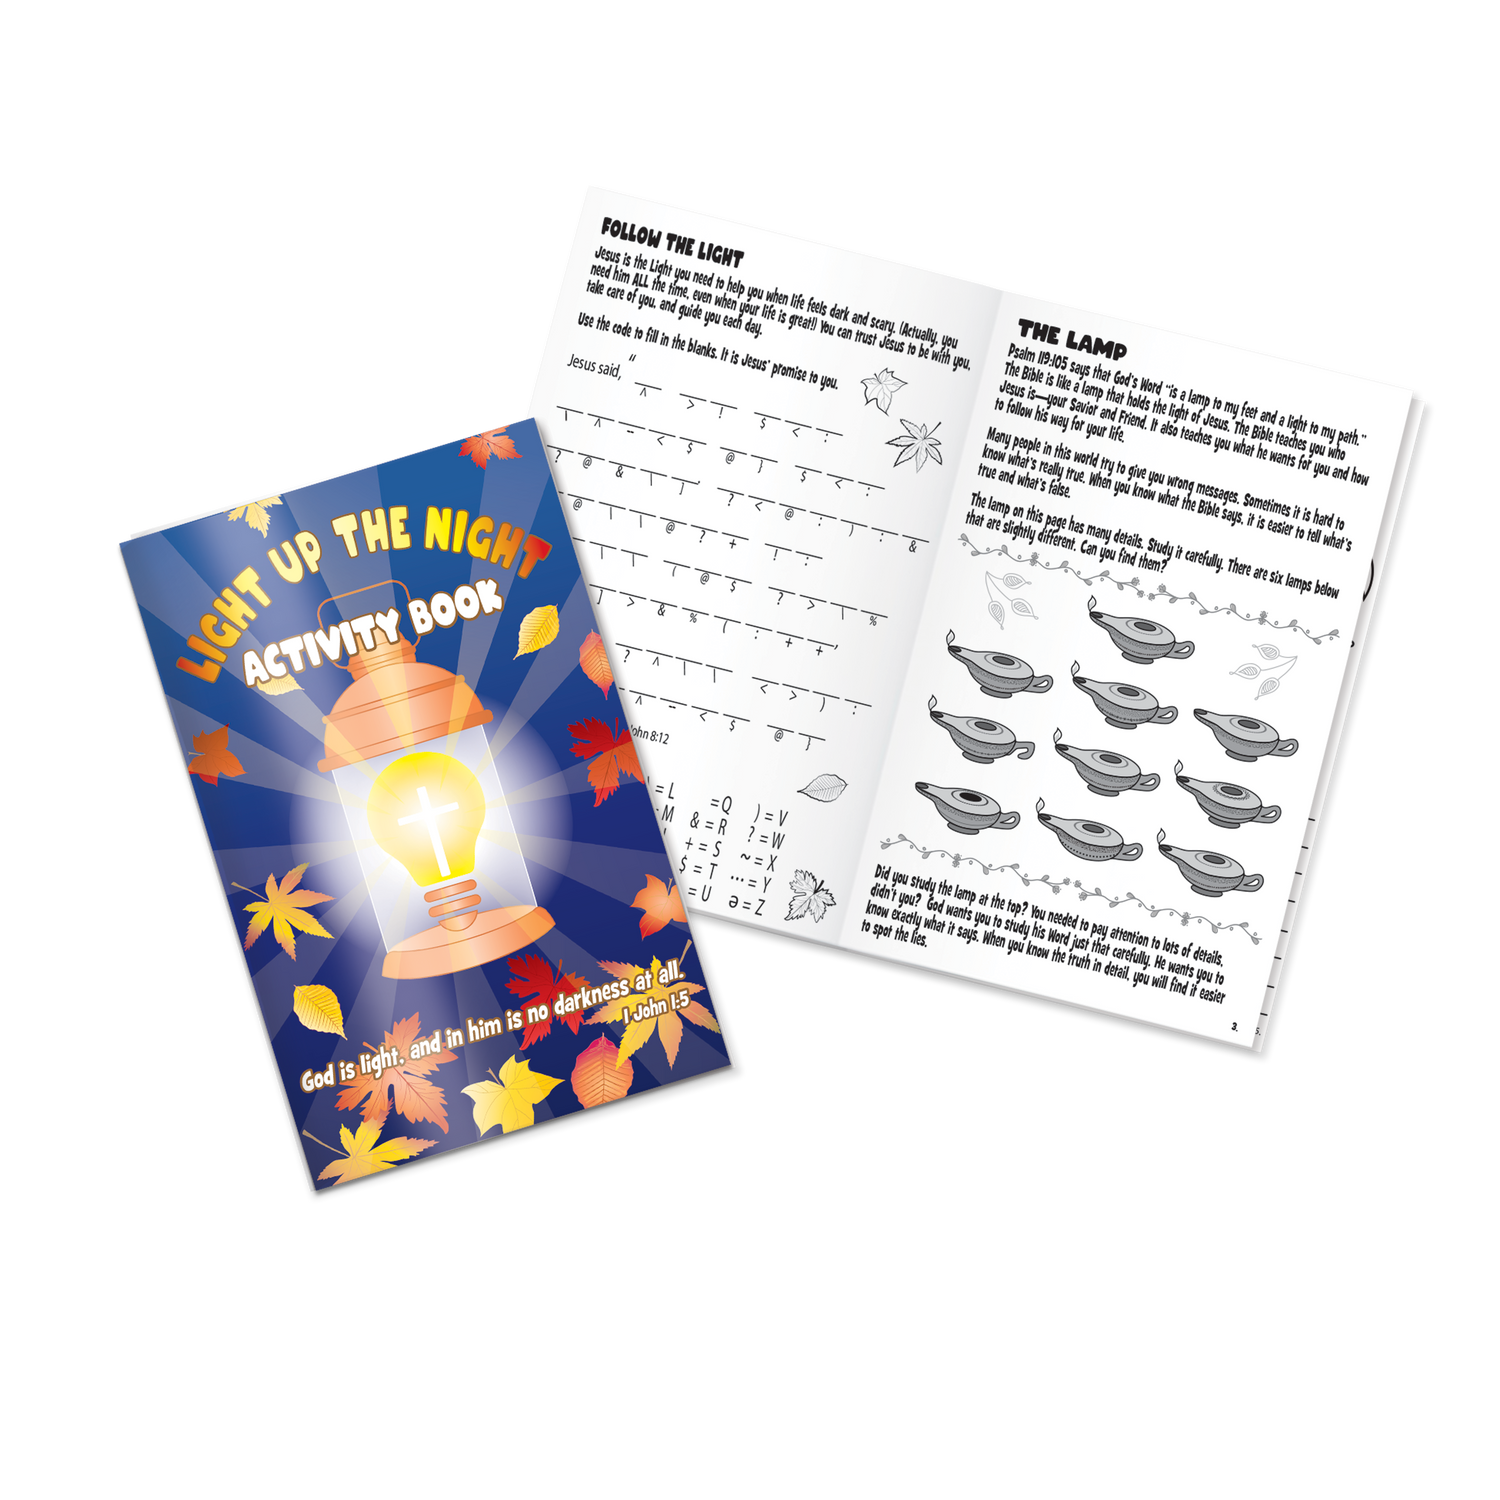 Light Up the Night activity book for Christian kids ages 7-11